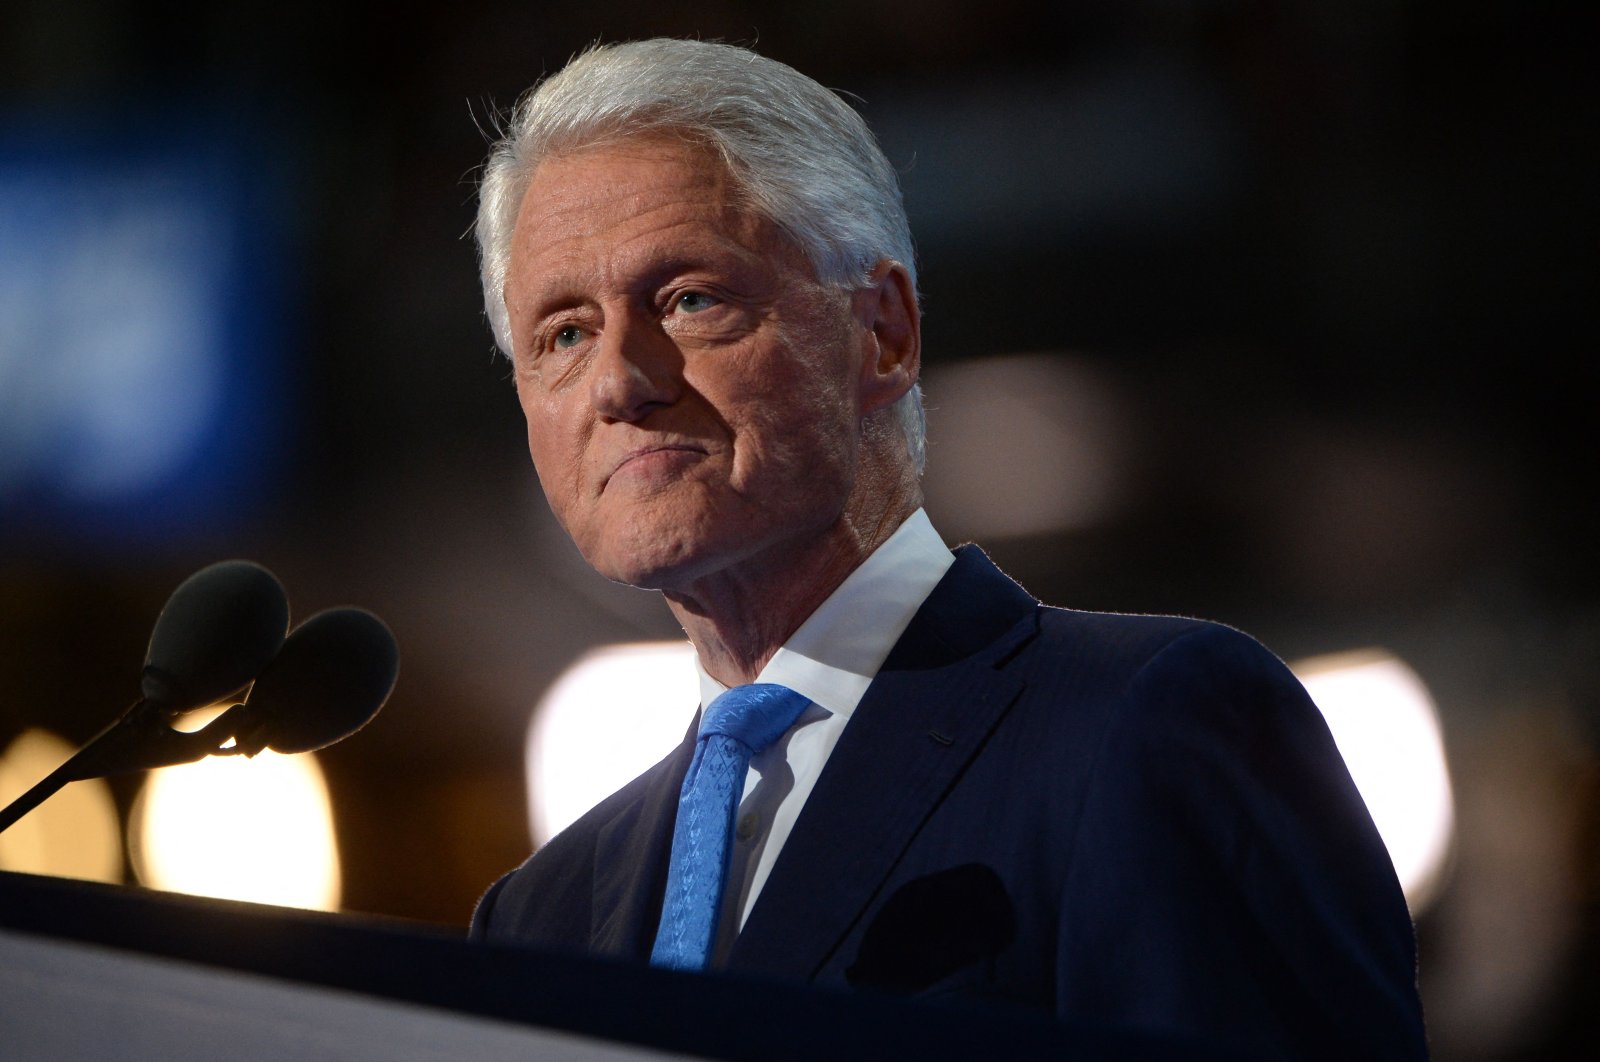 Former President Bill Clinton speaks on Day 2 of the Democratic National Convention at the Wells Fargo Center, in Philadelphia, Pennsylvania, U.S., July 26, 2016. (AFP Photo)